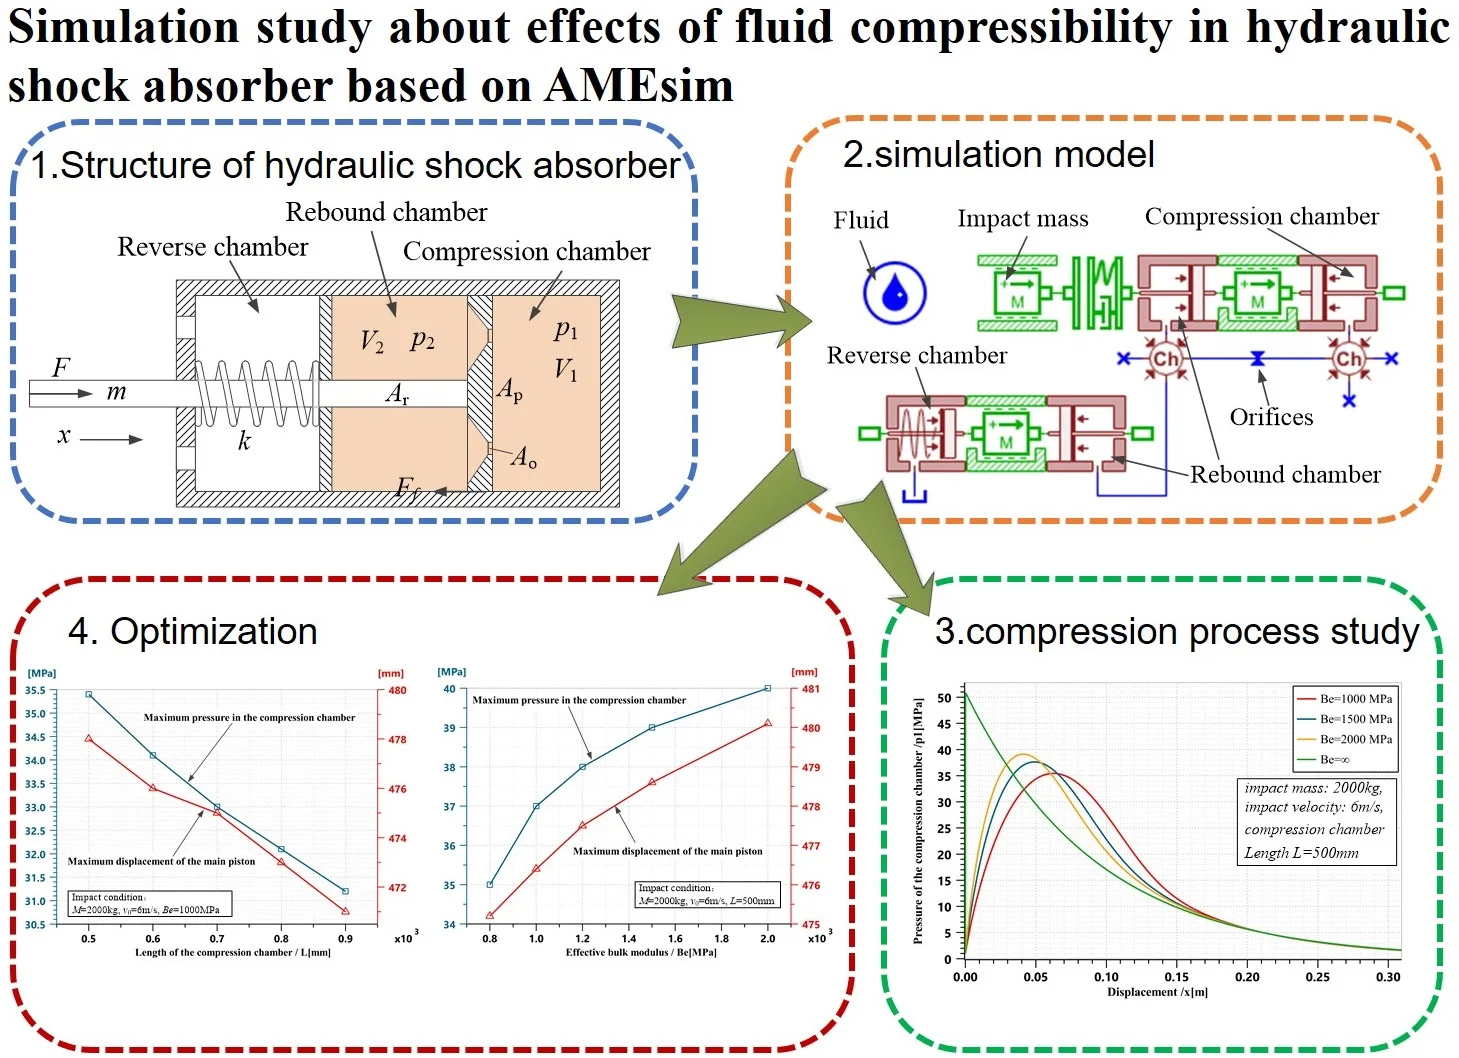 Simulation study about effects of fluid compressibility in hydraulic shock absorber based on AMEsim